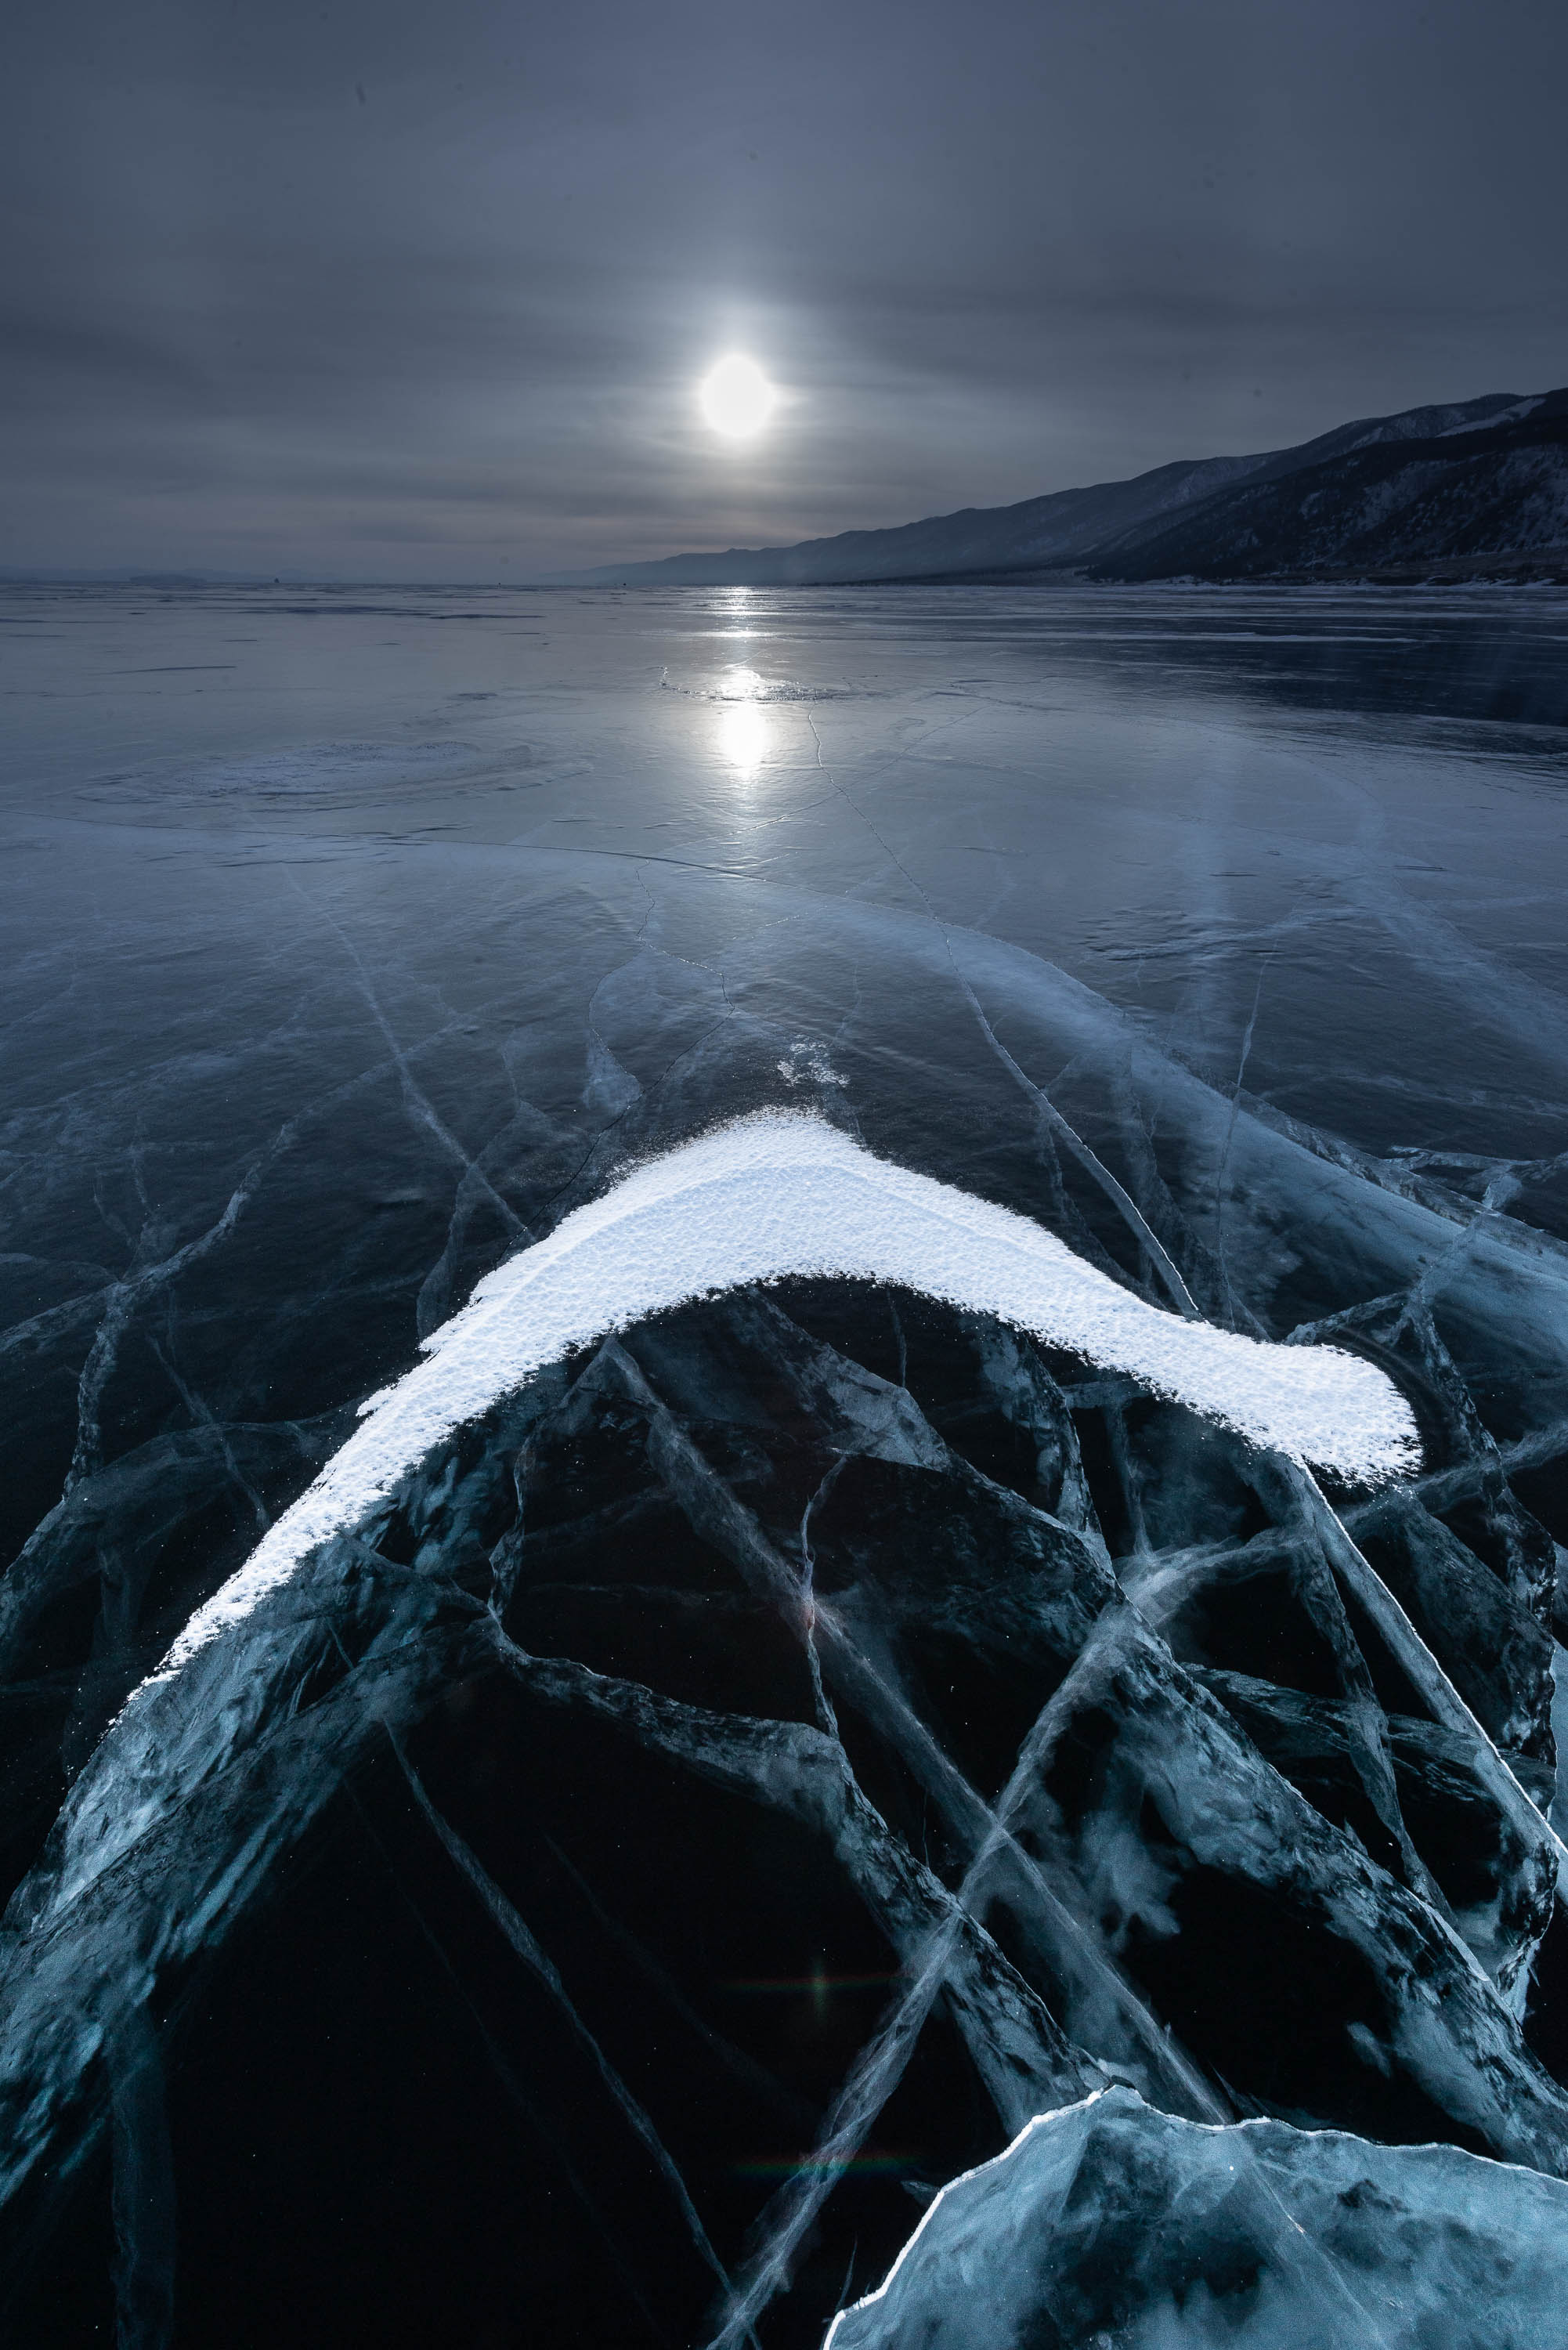 A frozen lake with some fresh snow, and a moonlight effect in the background, Lake Baikal #31, Siberia, Russia